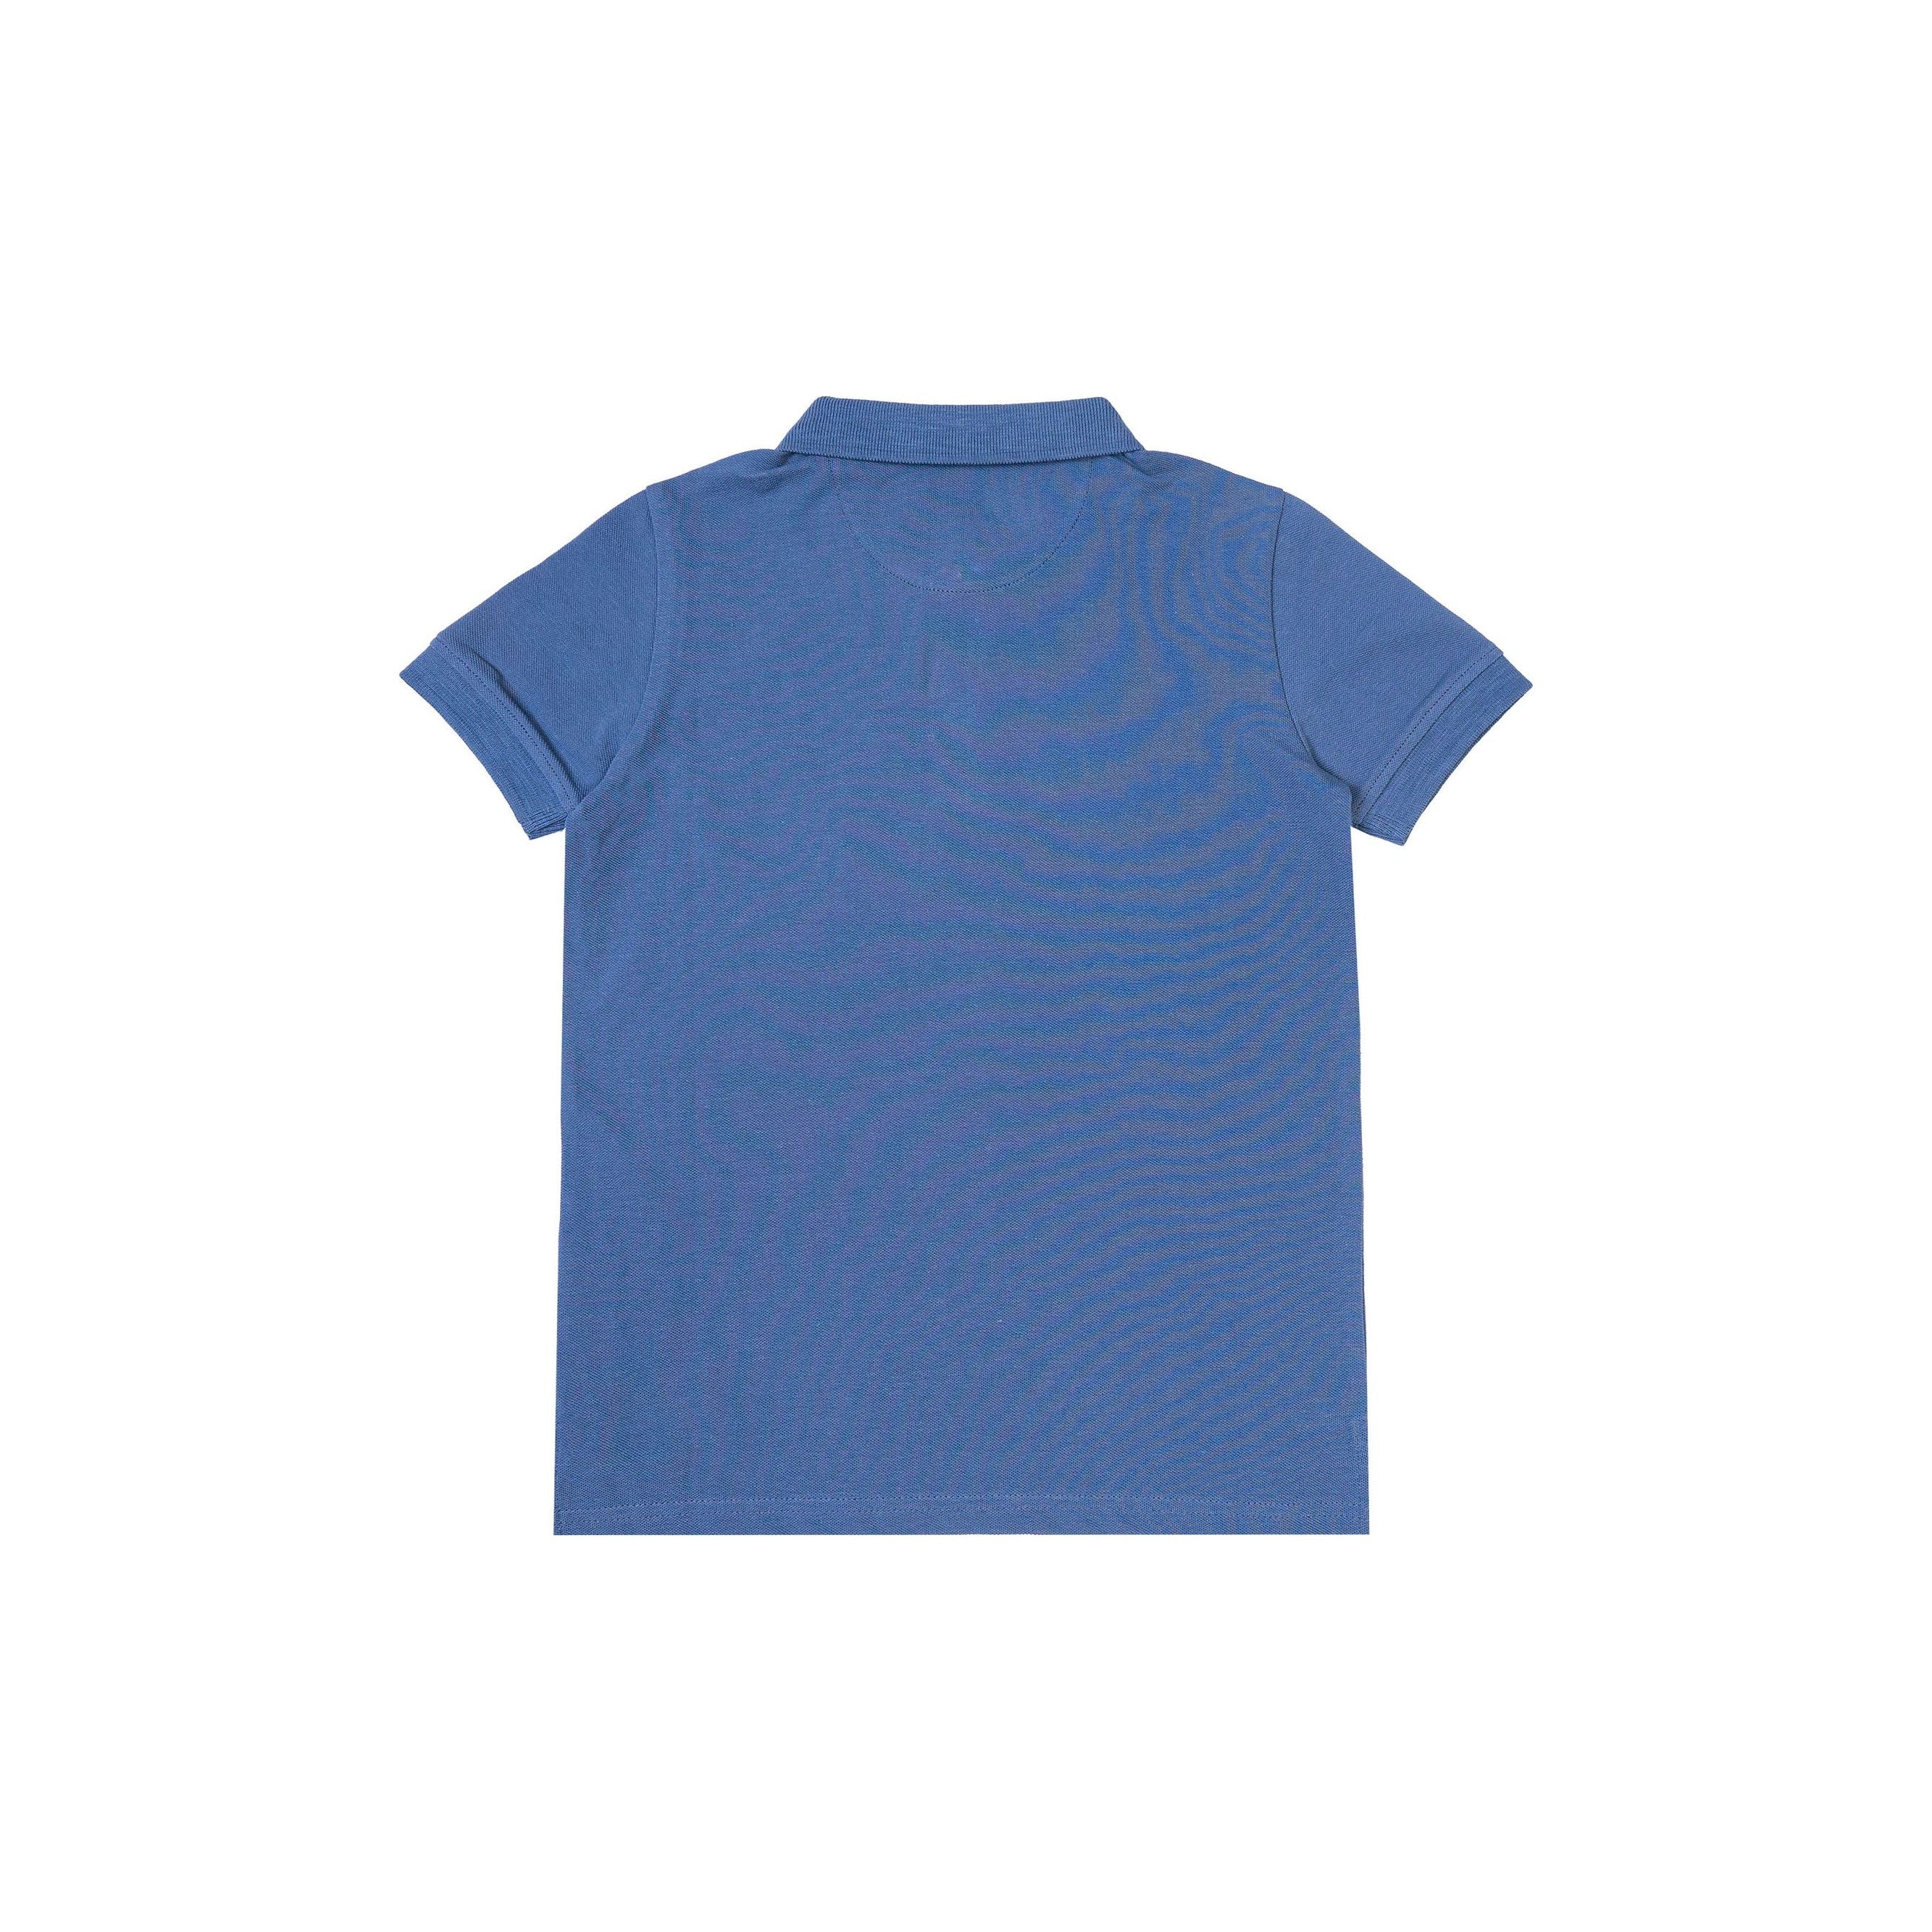 Silver Jeans - Boys Polo in Soft Blue